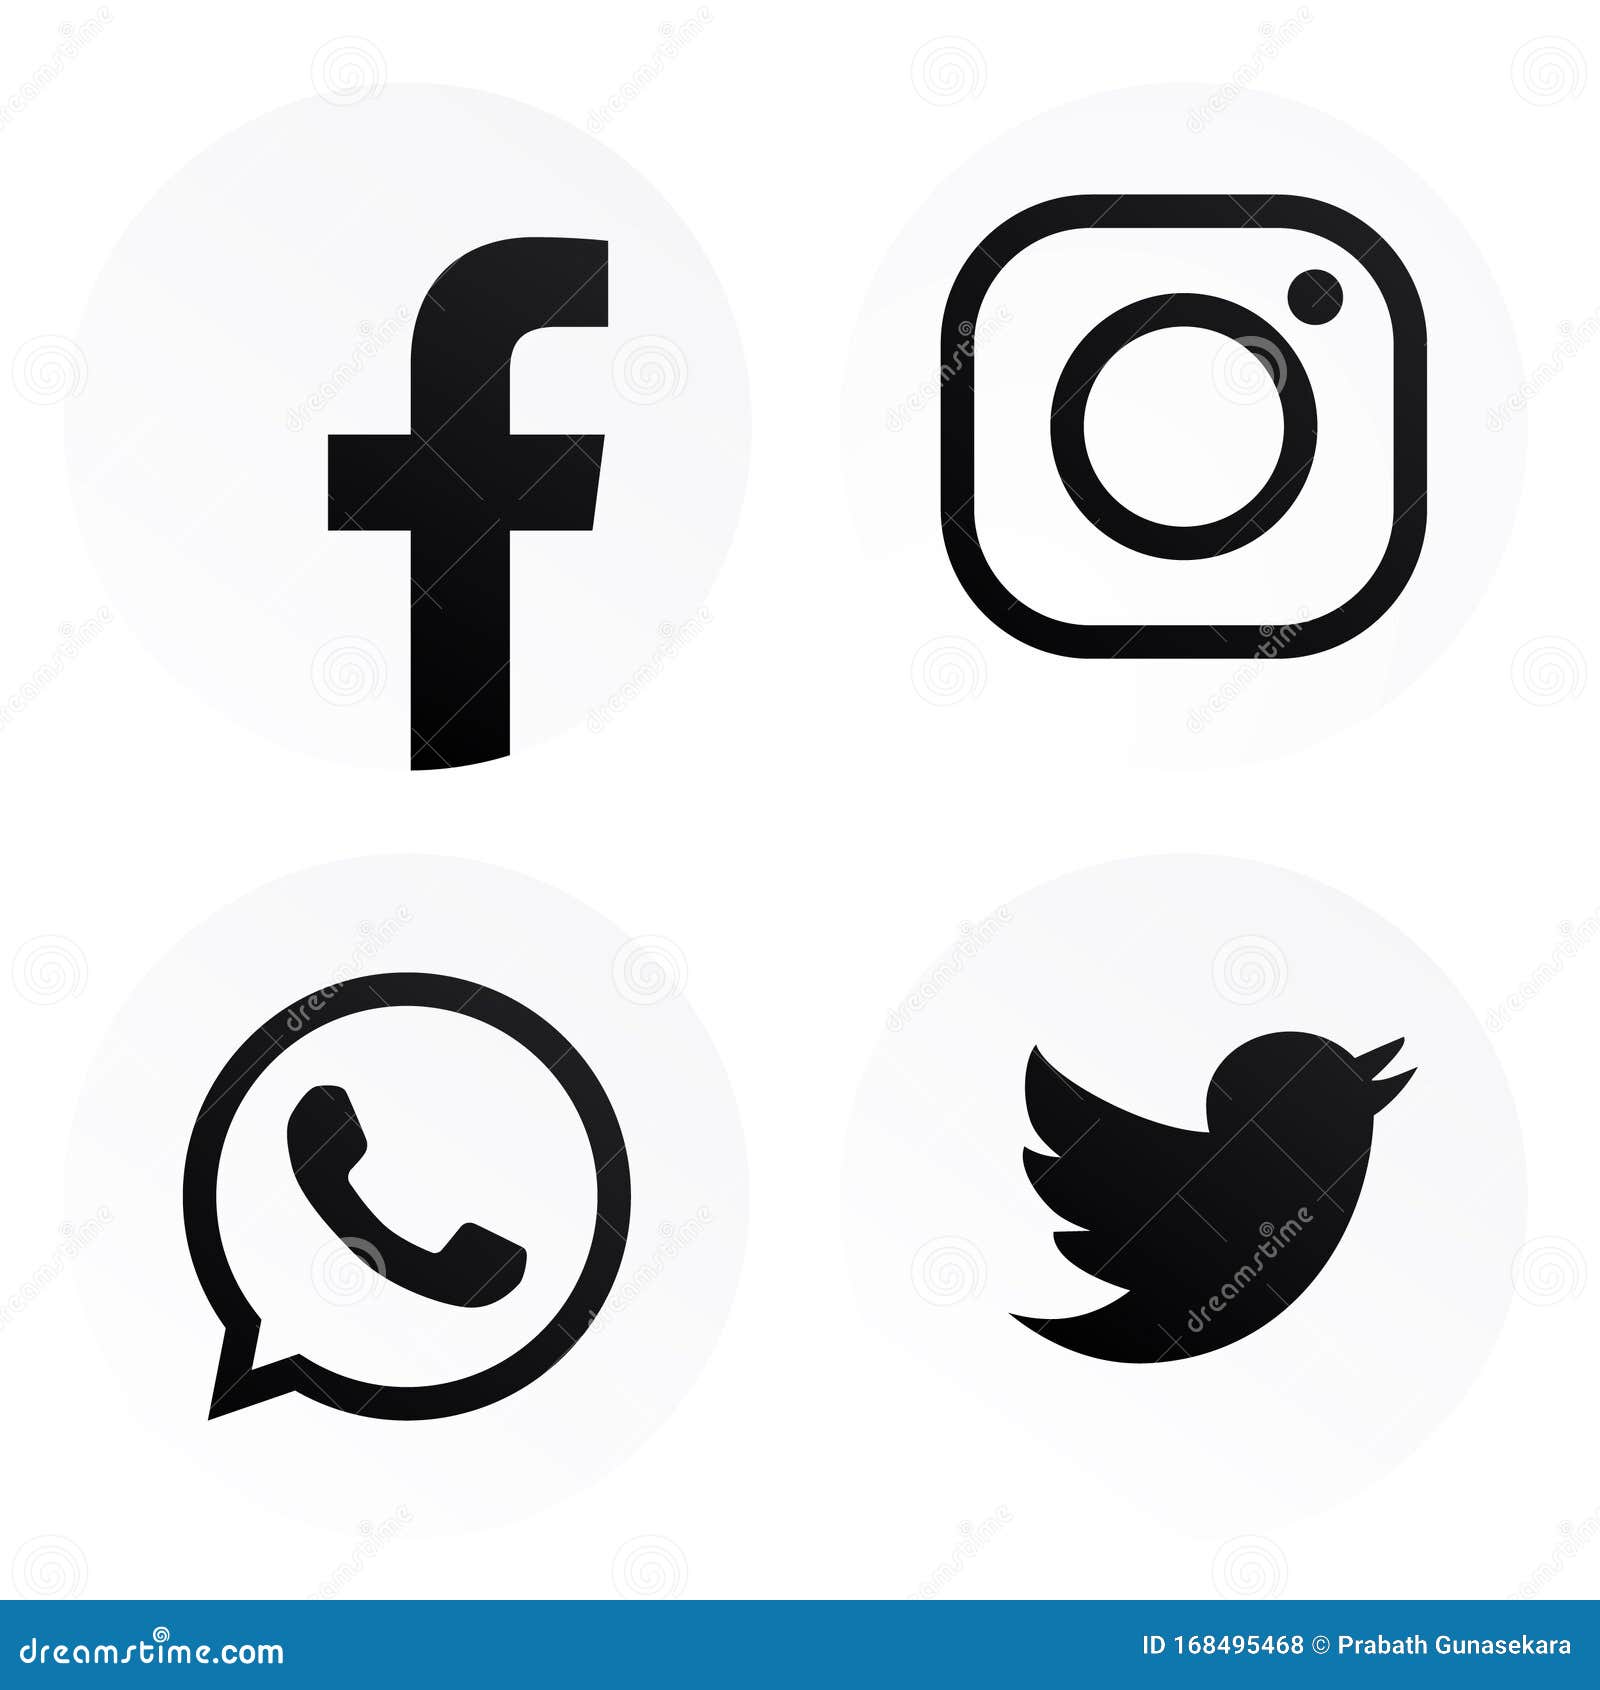 Facebook Instagram Whatsapp Twitter Logos With Black Color White Background Editorial Stock Photo Illustration Of Beautiful Pngwhatsapp